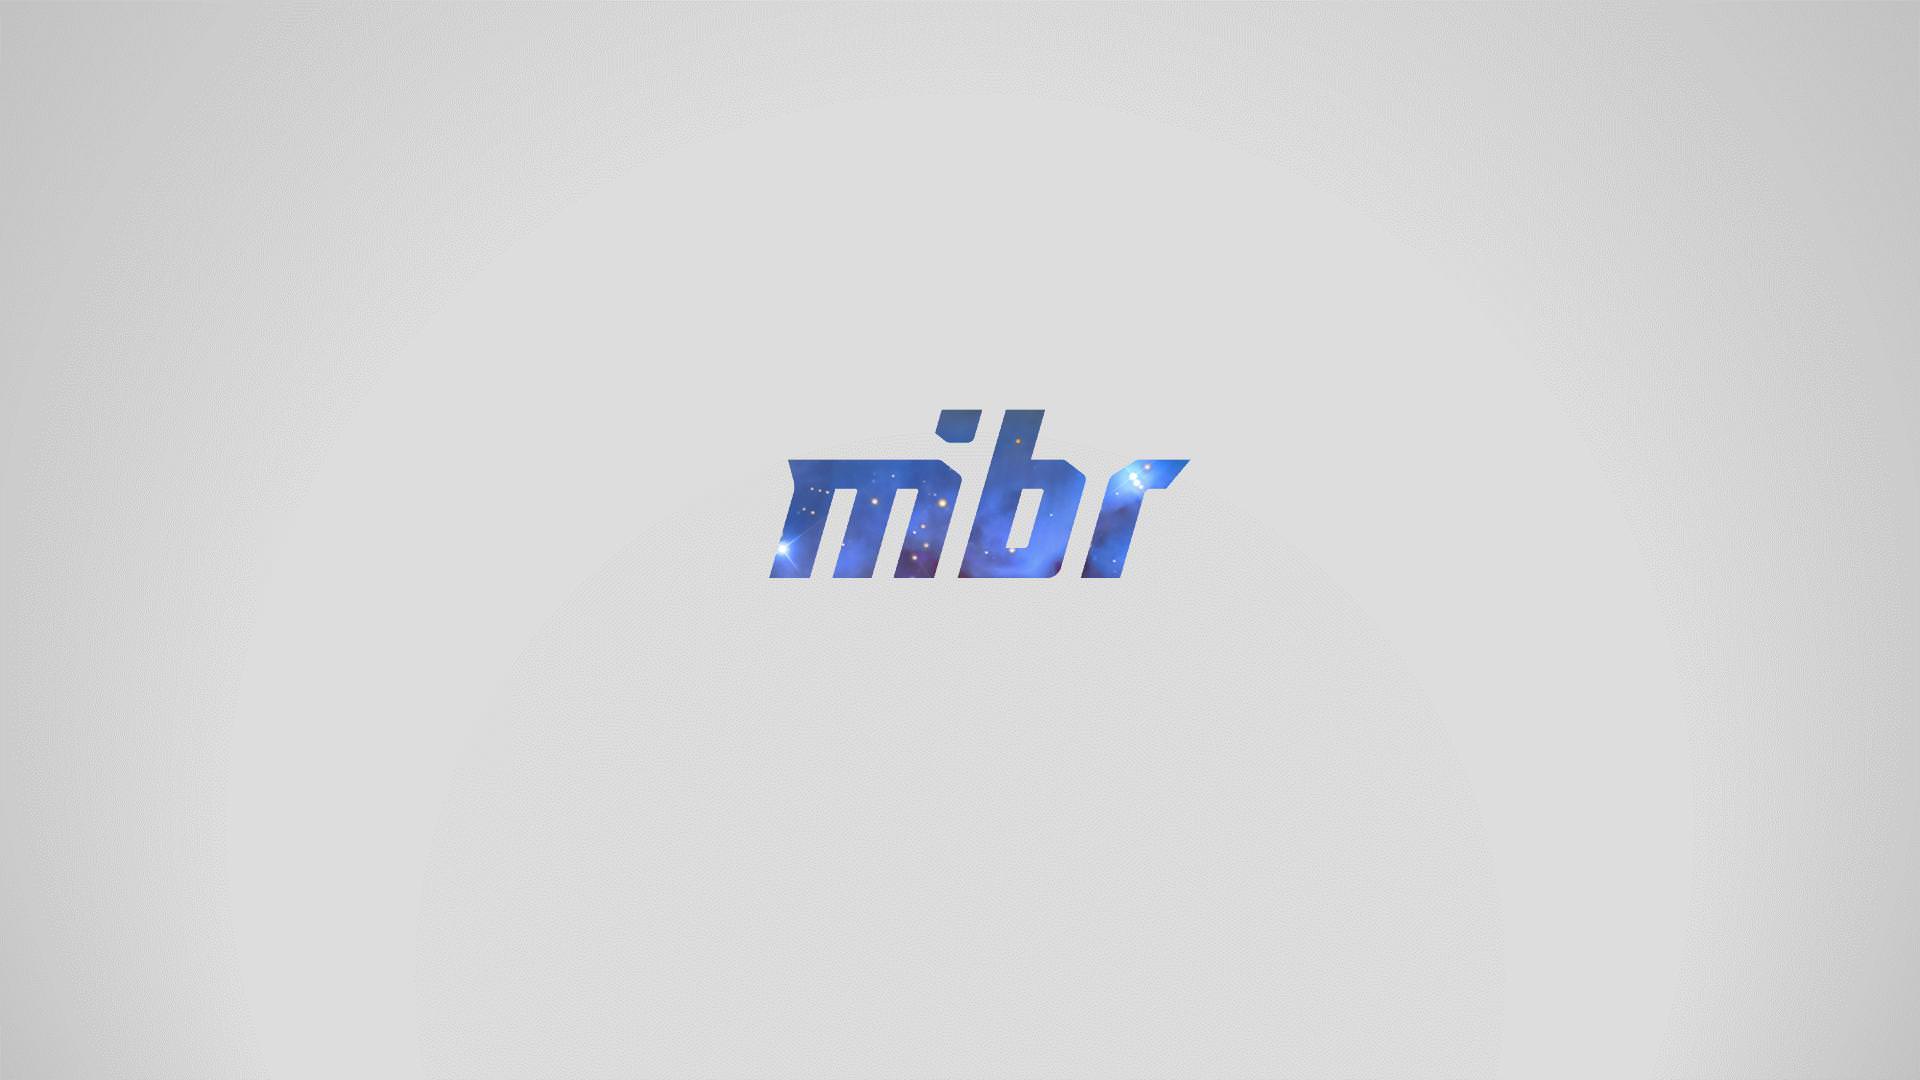 Some MIBR wallpaper that i made